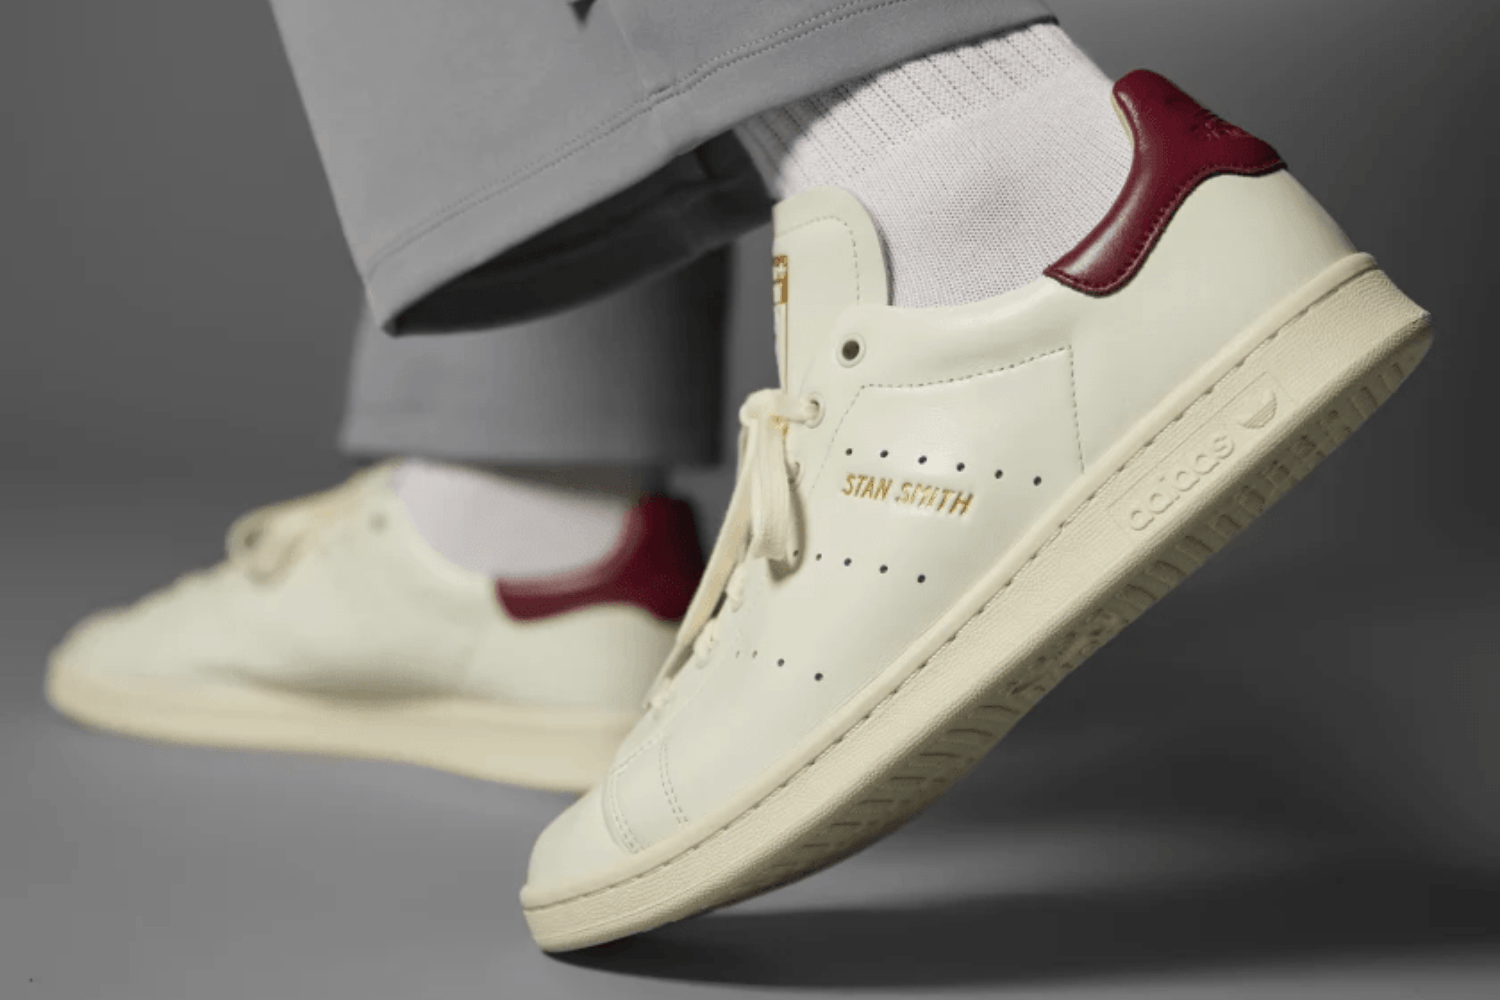 Have you seen the adidas Stan Smith Lux?